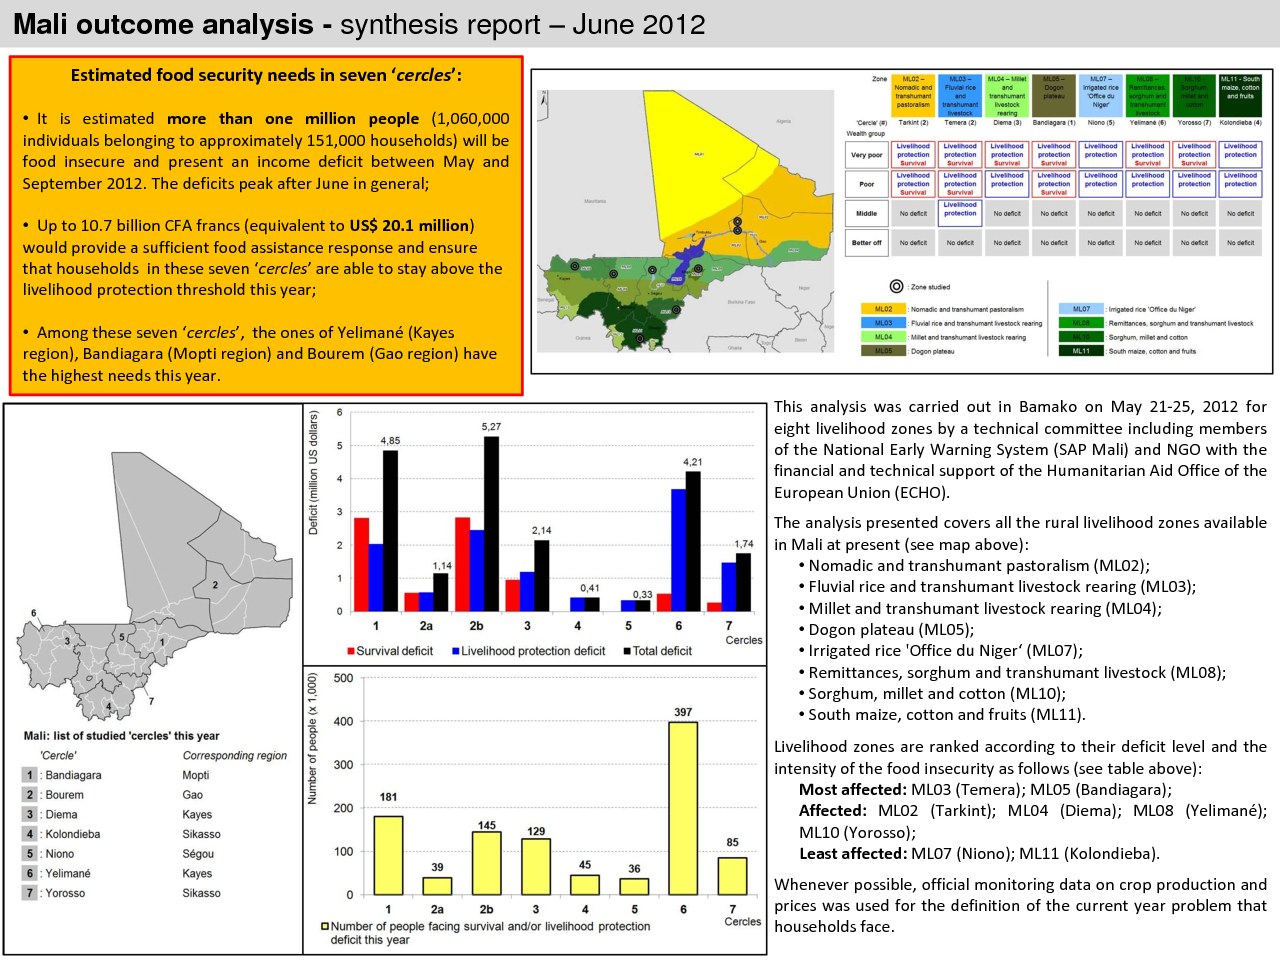 Outcome Analysis Synthesis - Mali - June 2012